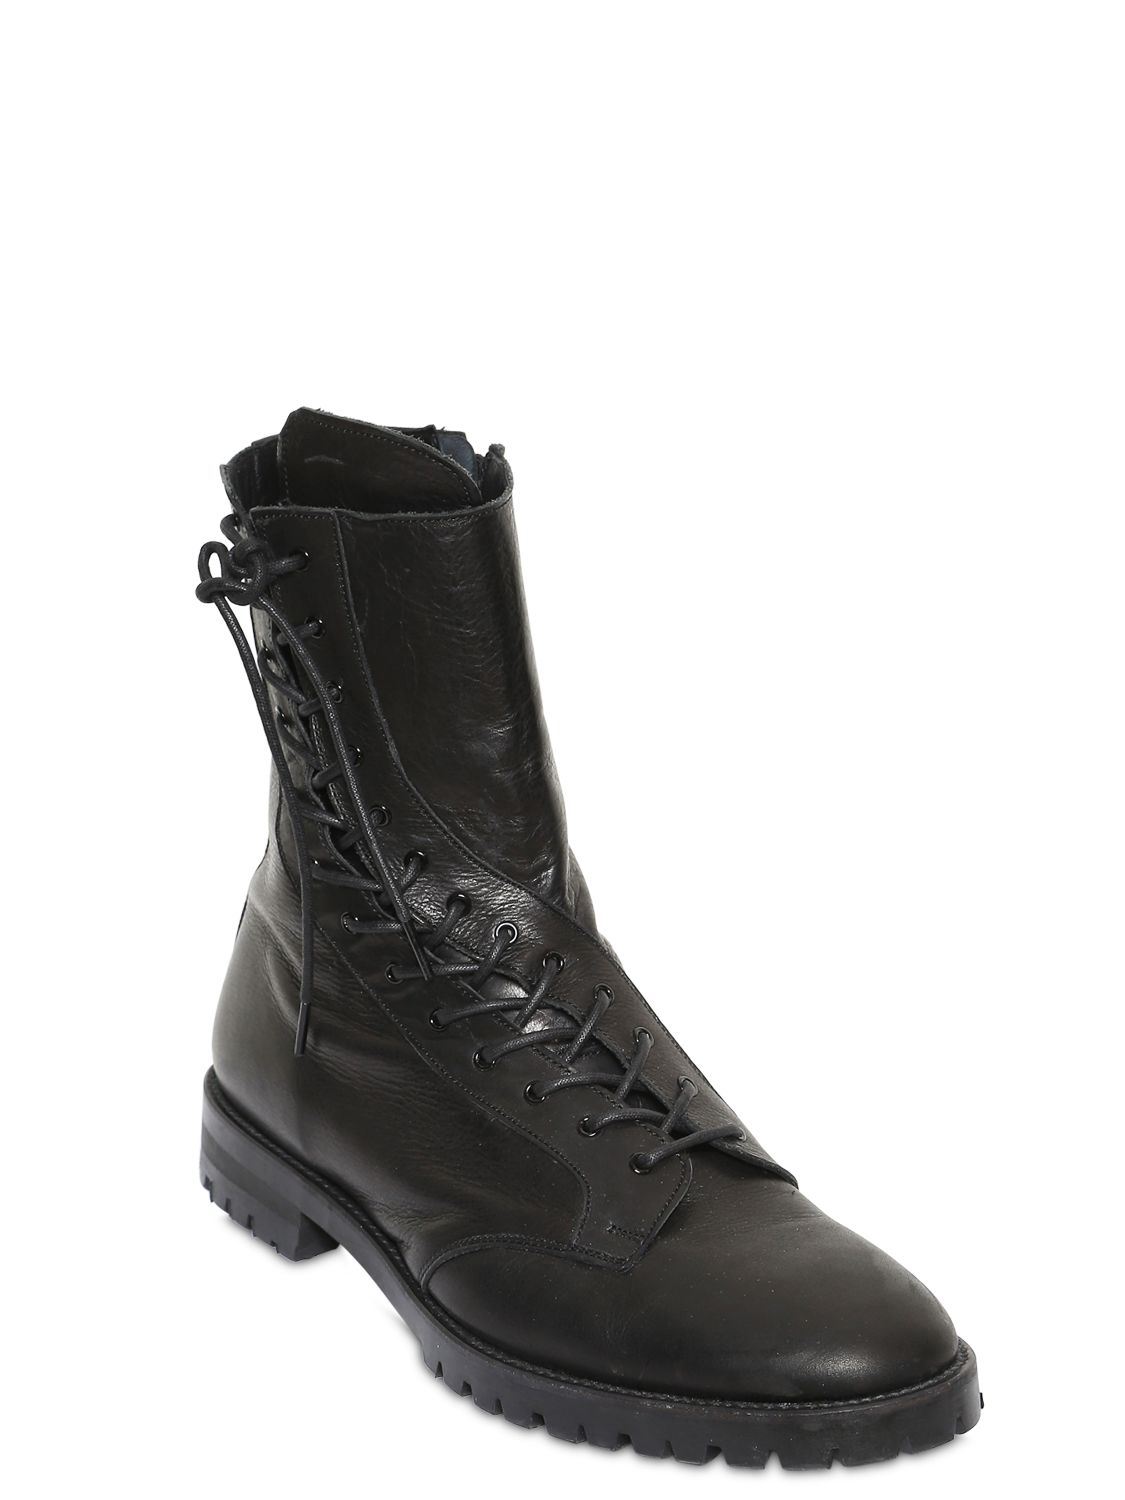 Yohji Yamamoto Twisted Lace-up Leather Cropped Boots in Black | Lyst